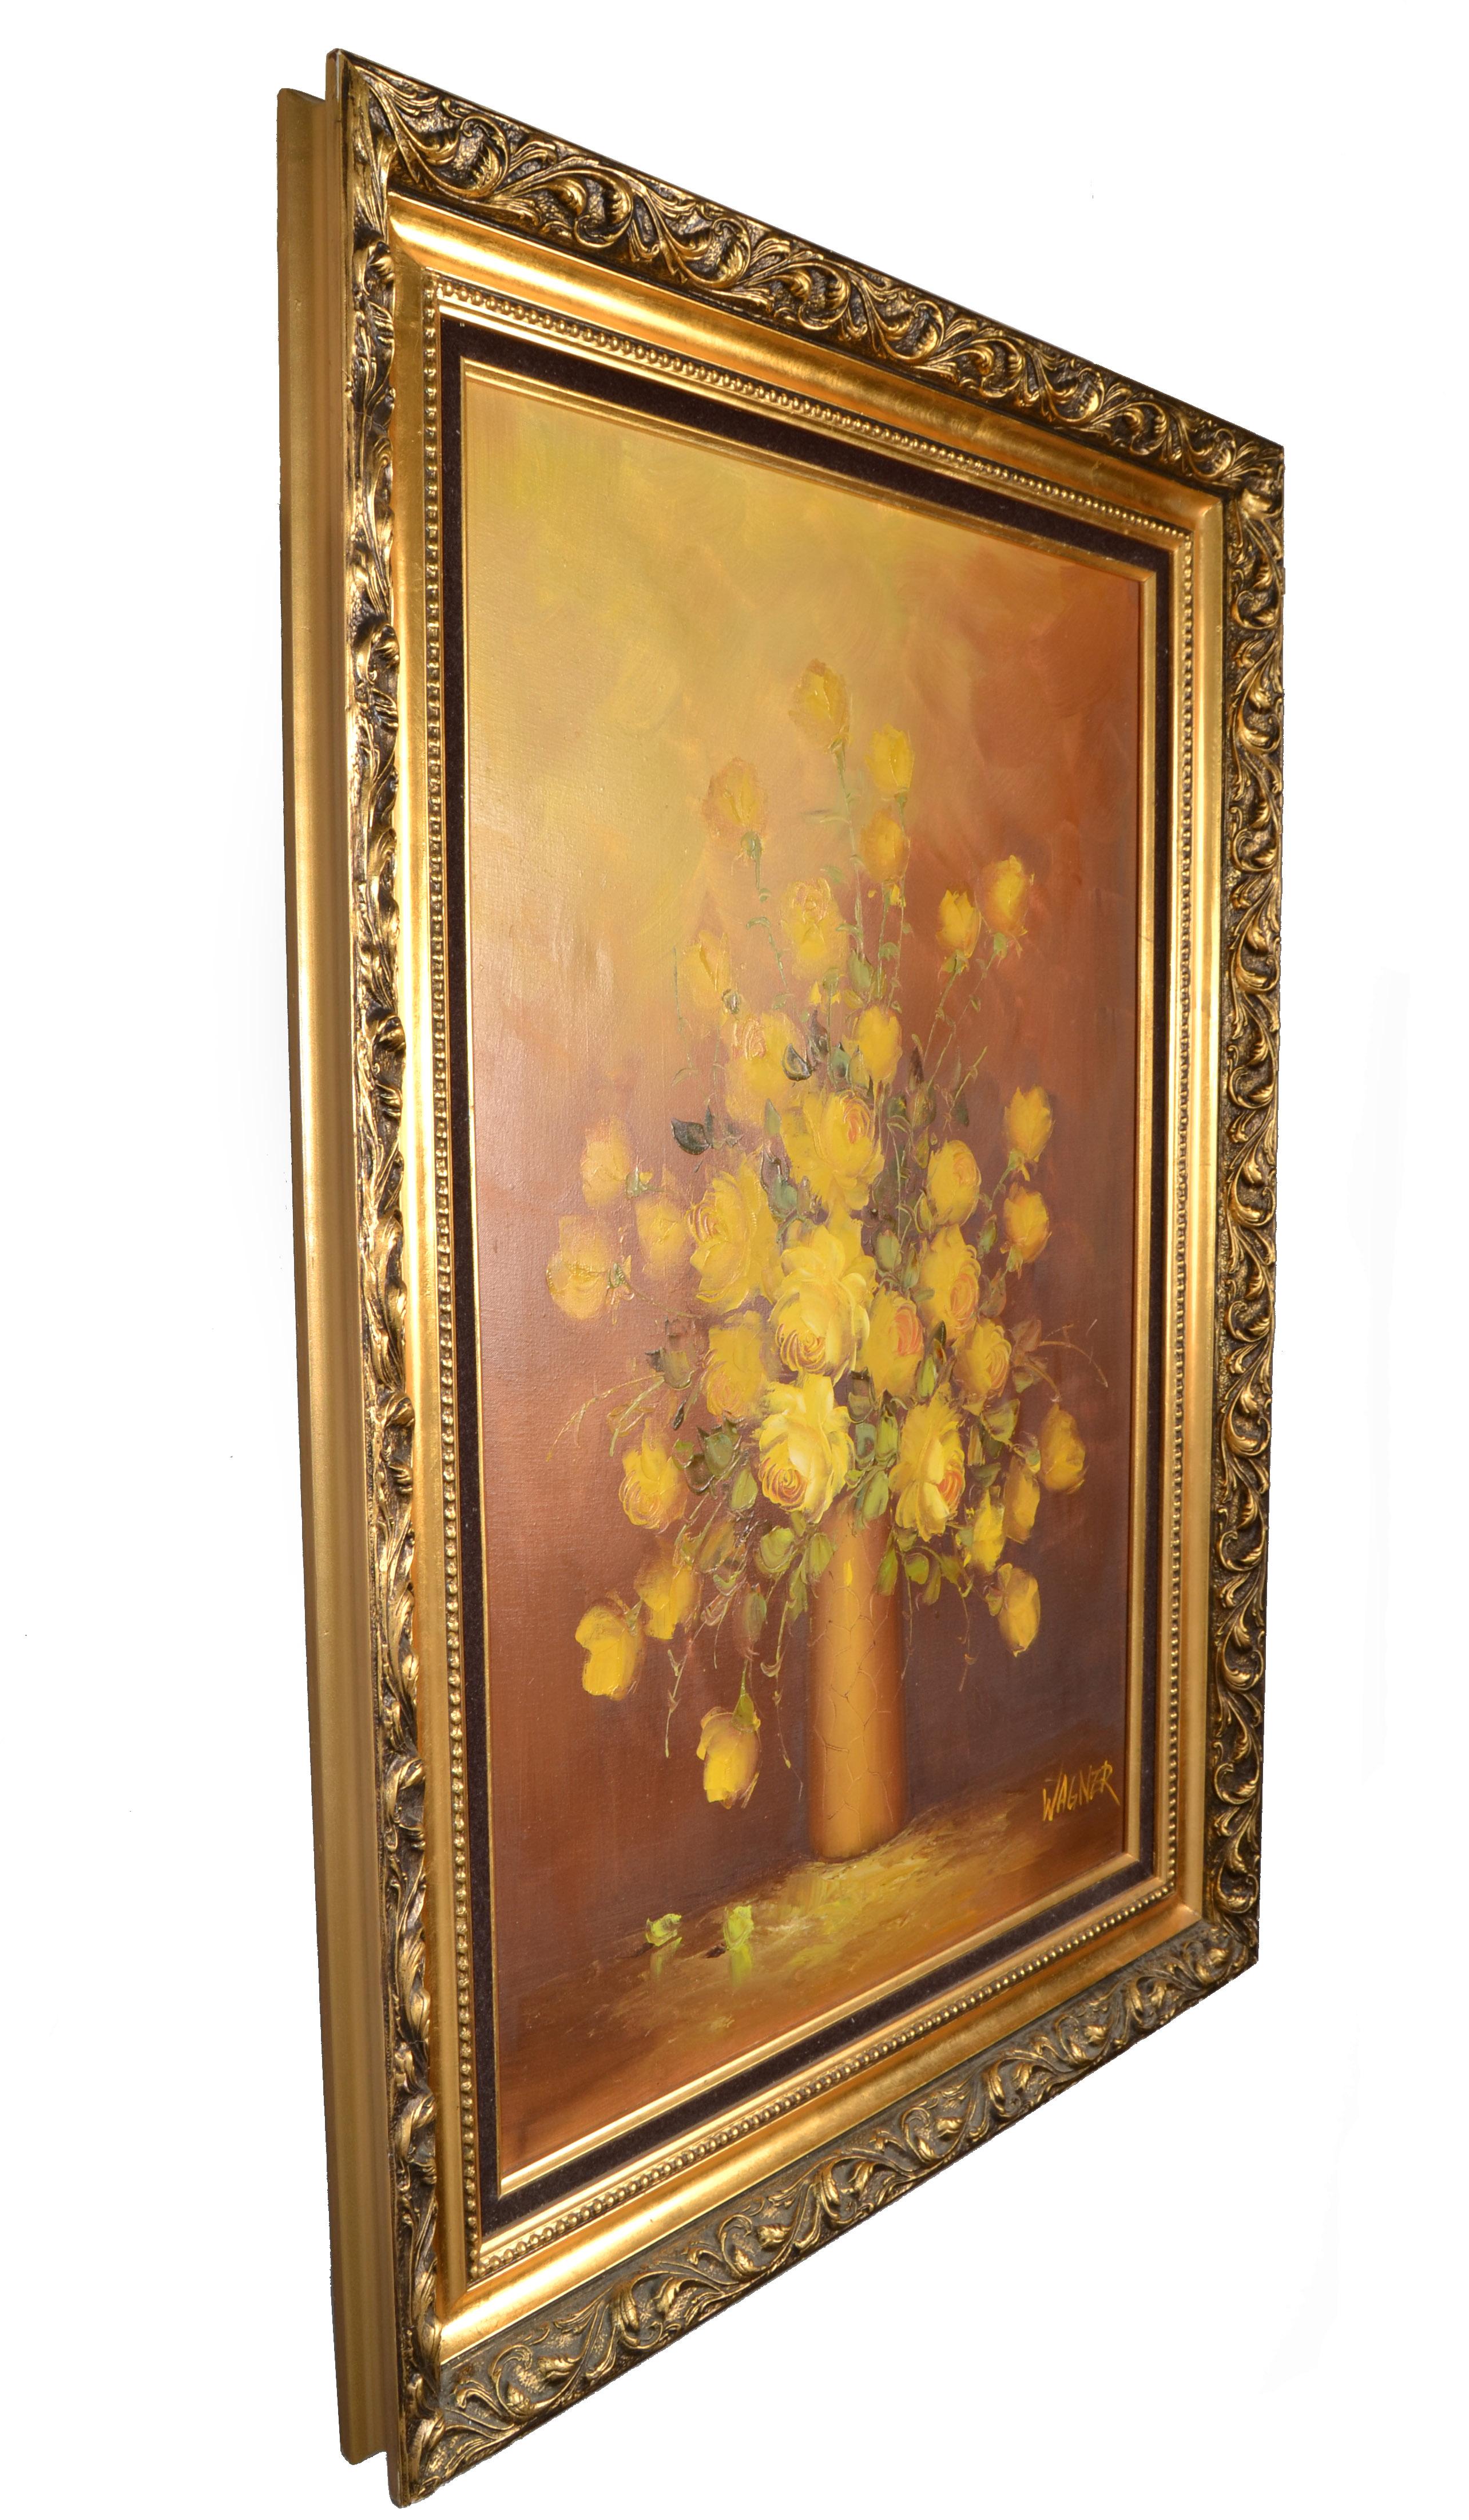 F. Wagner Framed Classical Floral Still Life Roses Painting Oil on Canvas, 1972 In Good Condition For Sale In Miami, FL